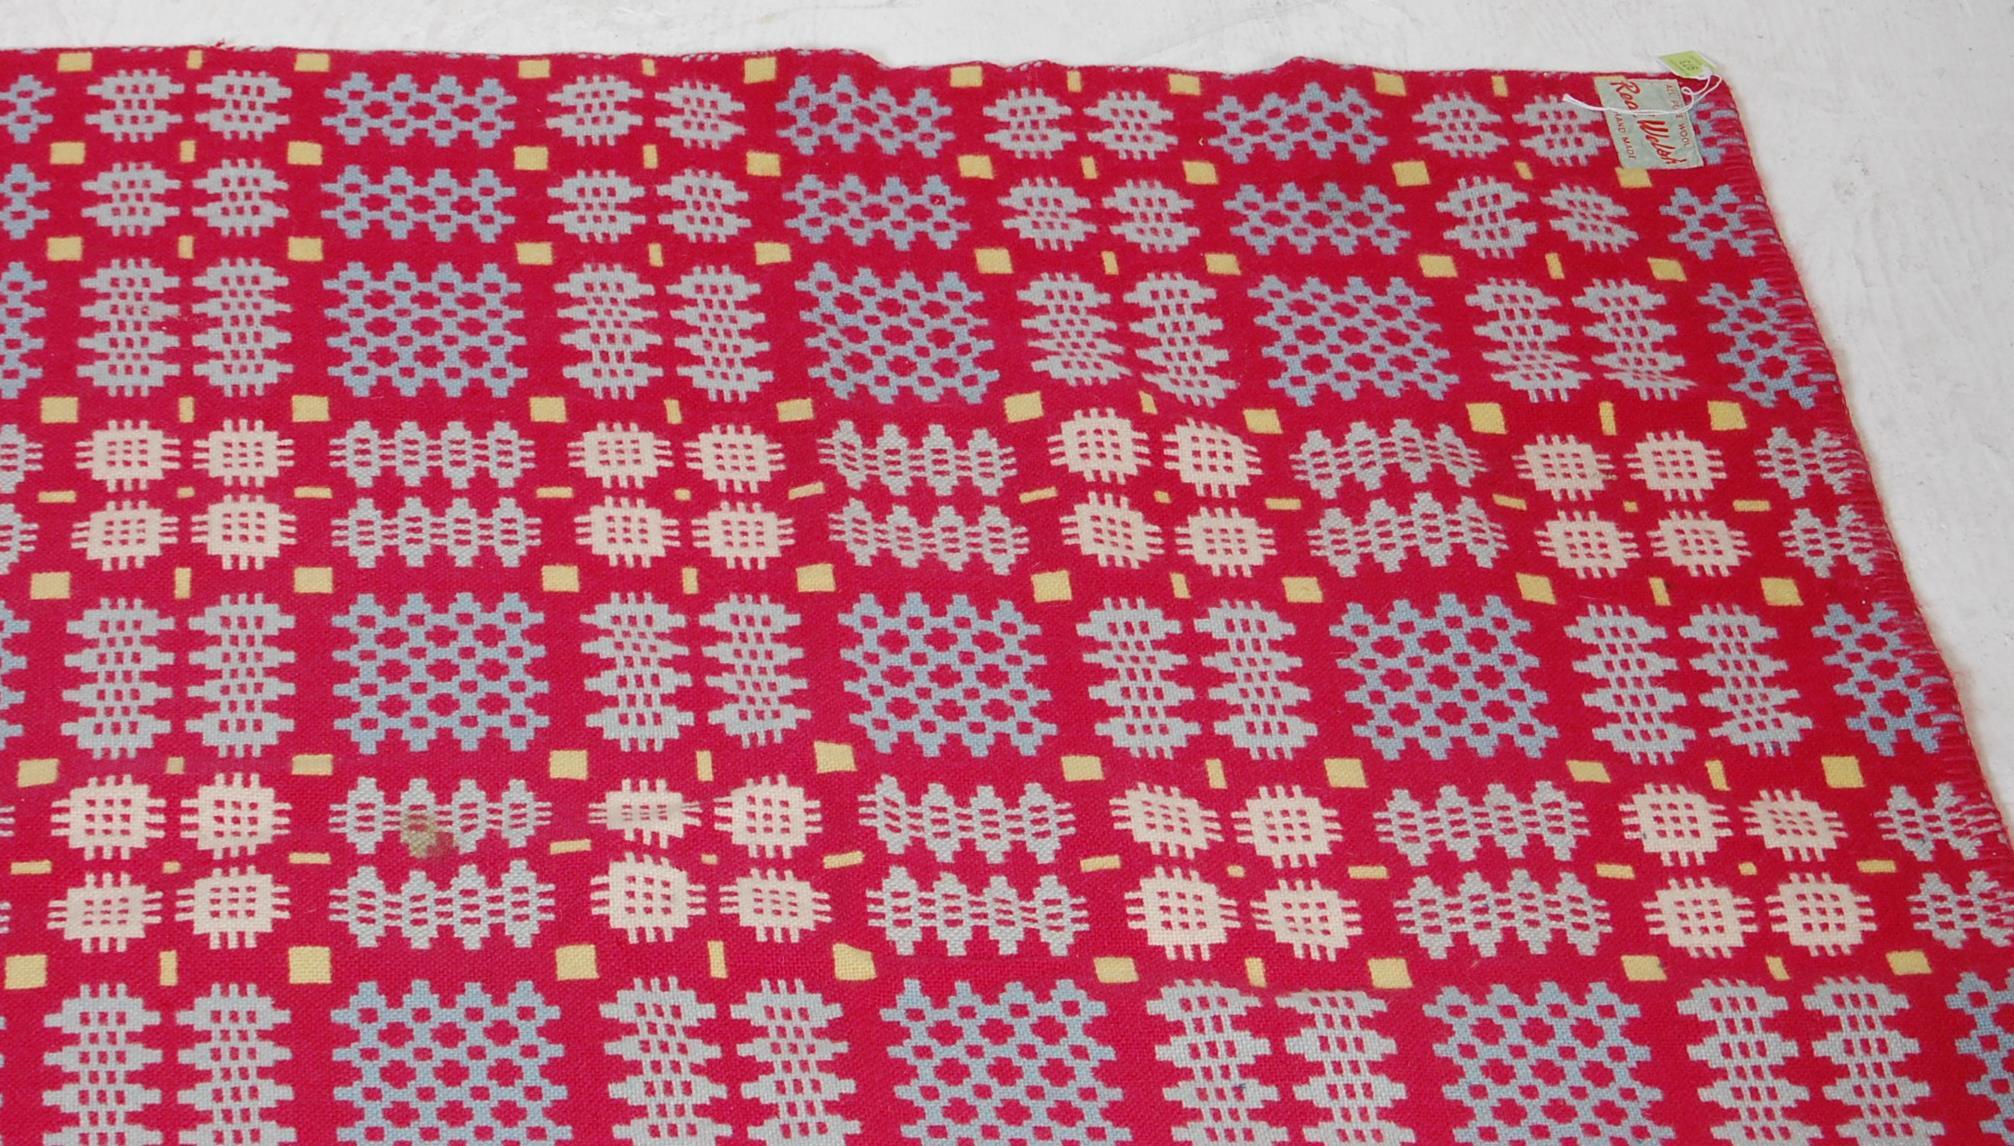 LARGE 20TH CENTURY HAND MADE WELSH BLANKET BY REAL WELSH - Image 2 of 7